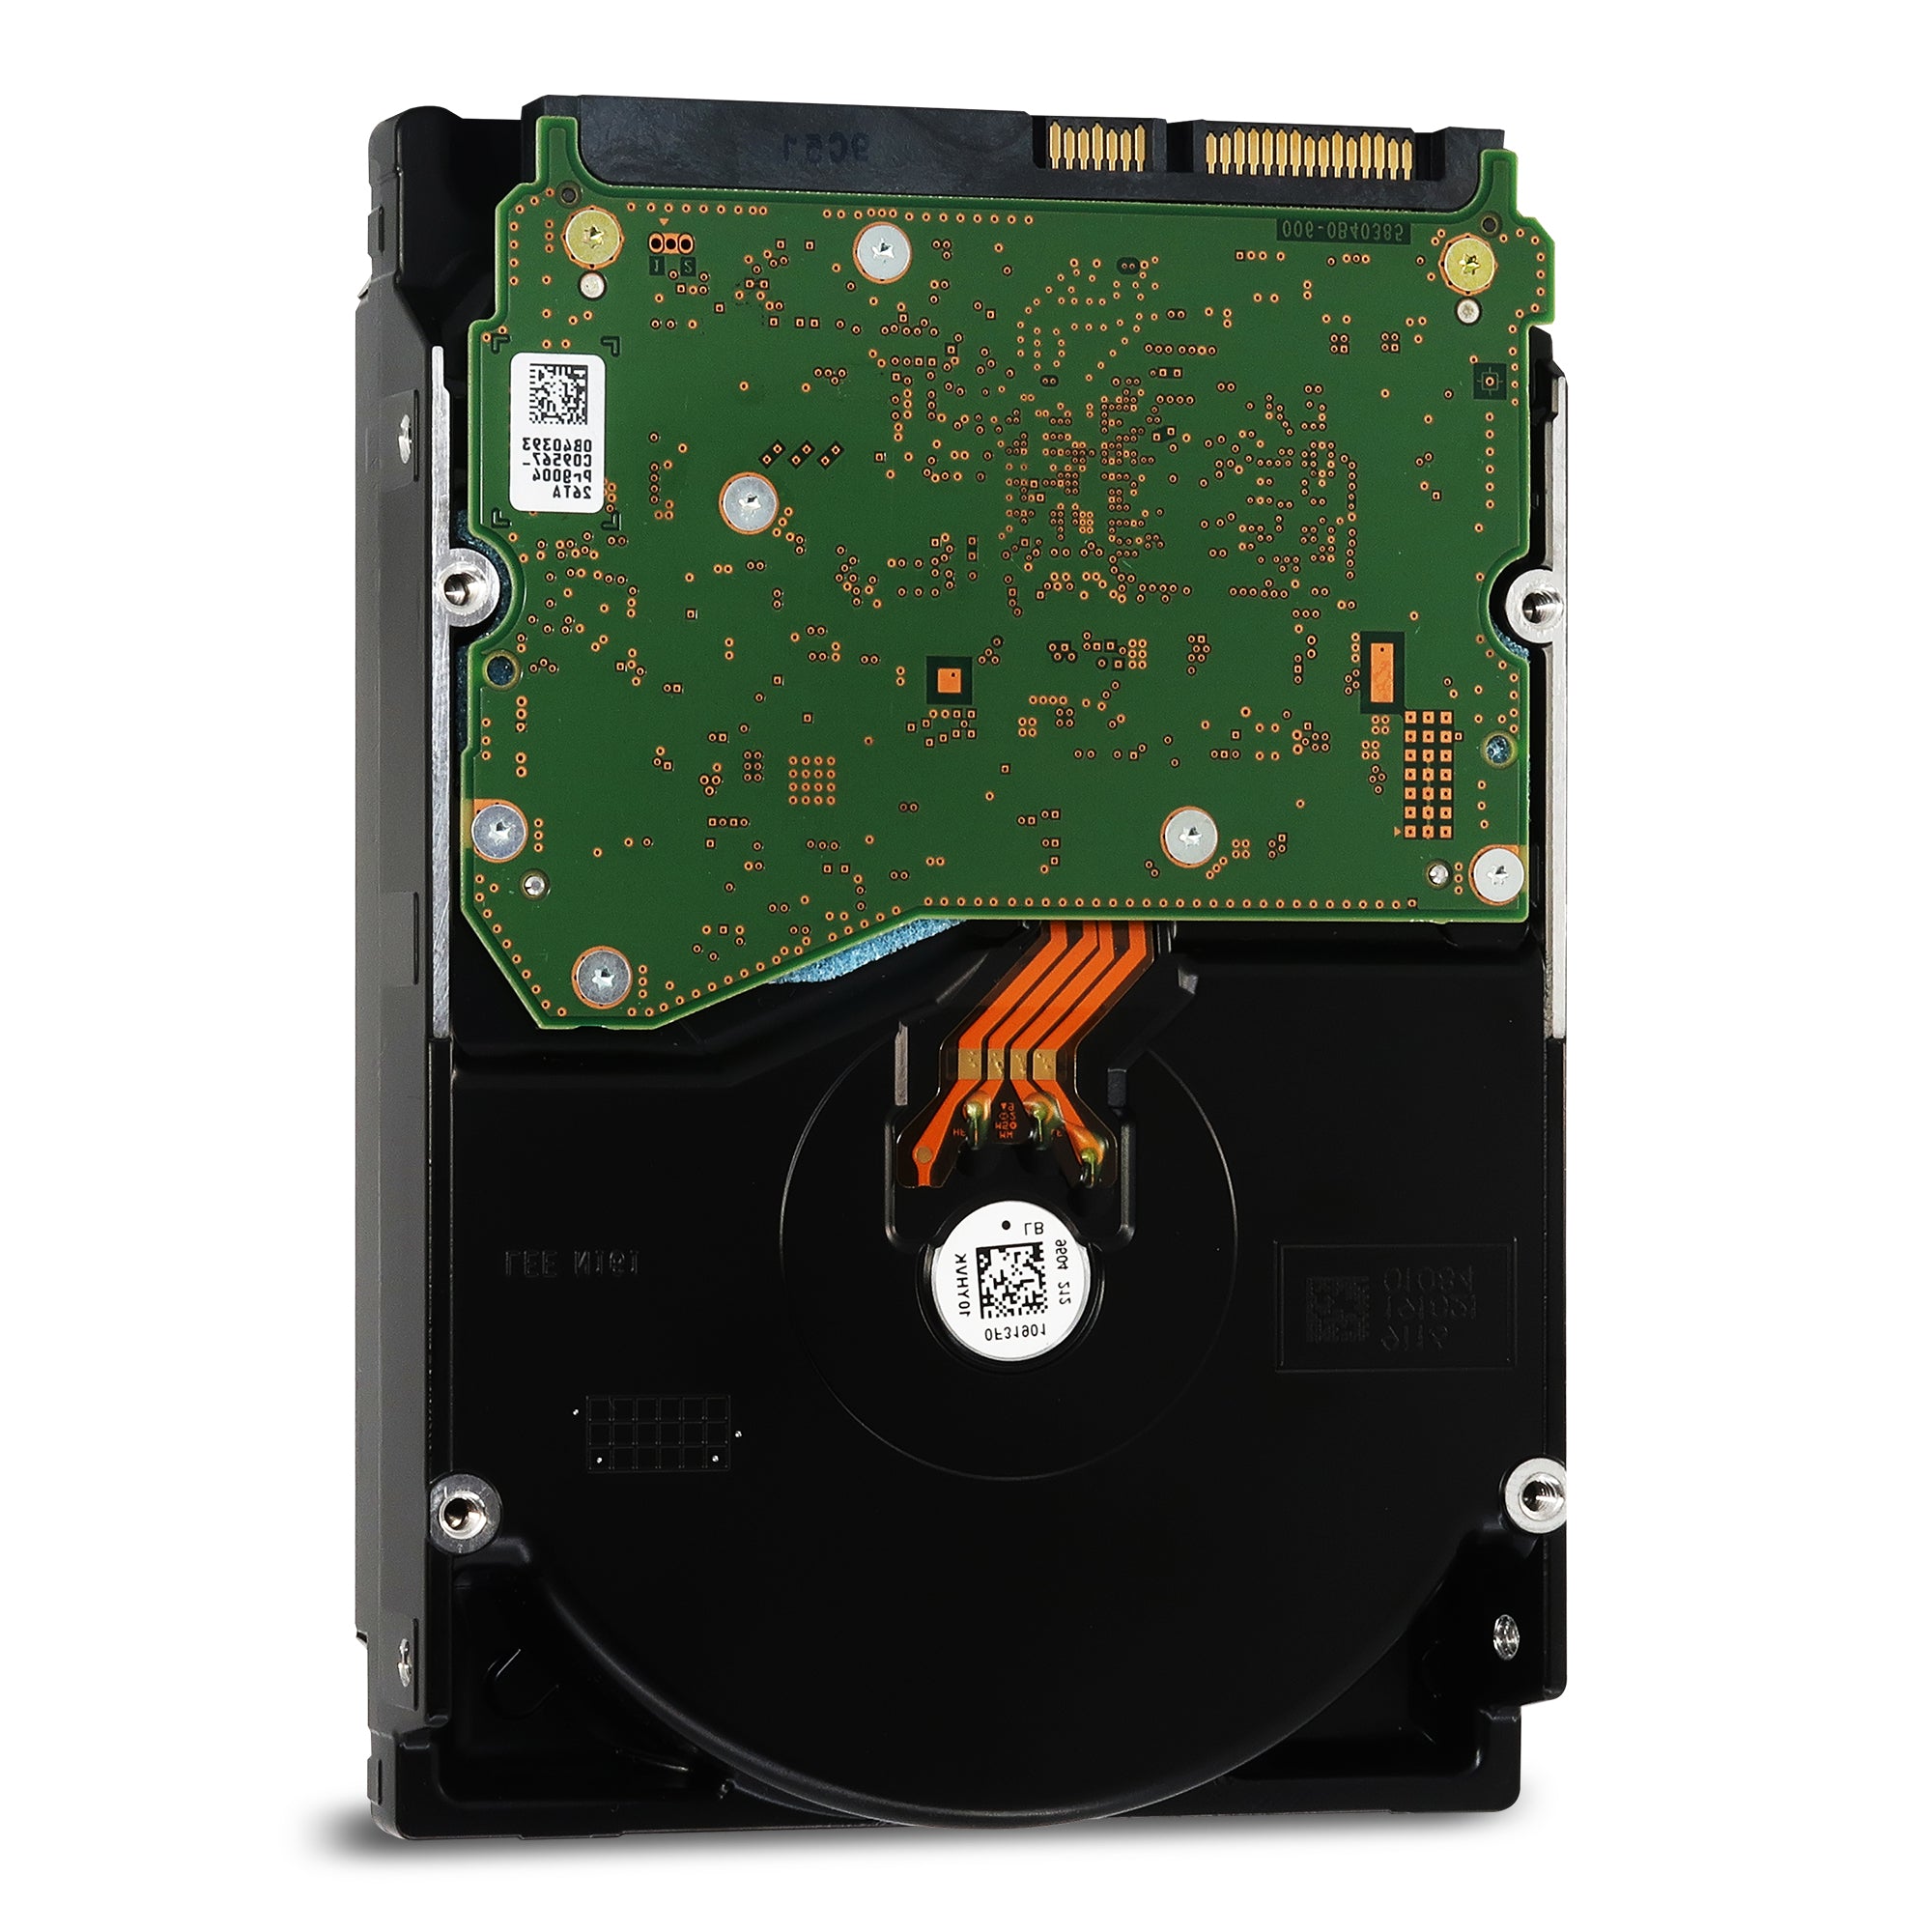 WD / HGST Ultrastar He10 / HC510 HUH721010ALN601 0F27503 10TB 7.2K RPM SATA 6Gb/s 4Kn 256MB 3.5" SED Power Disable Pin Manufacturer Recertified HDD - Rear View